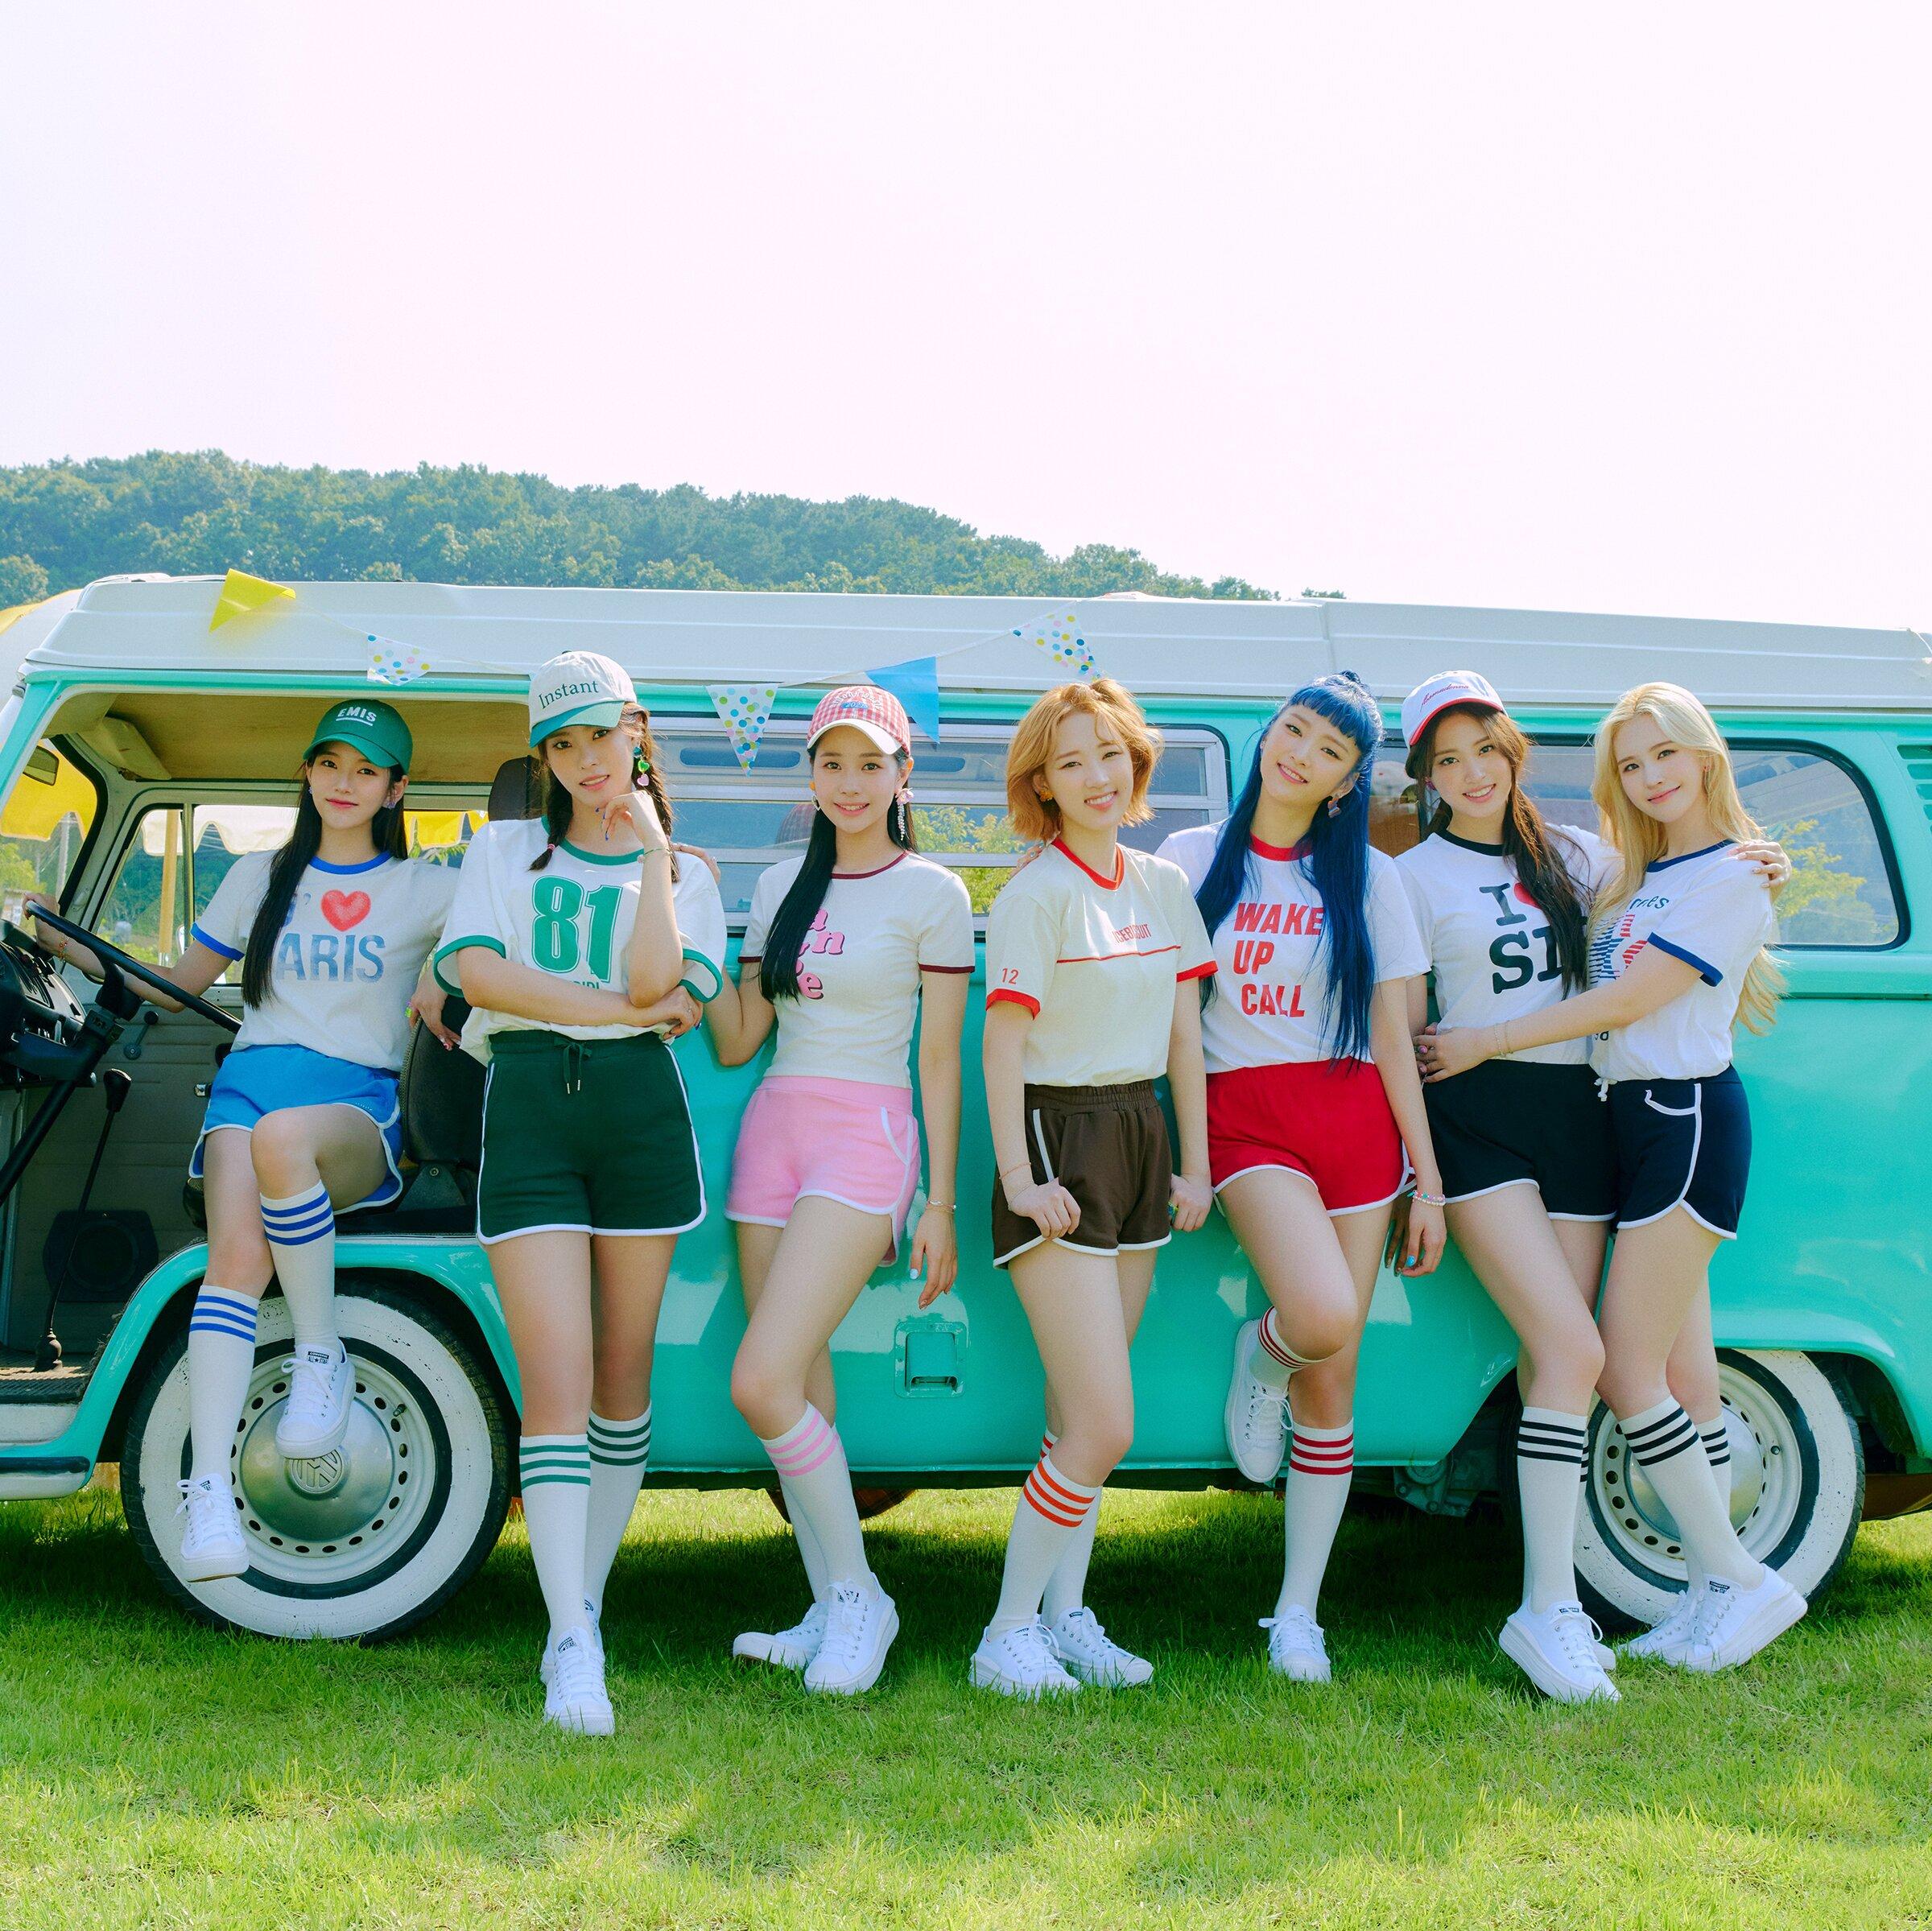 Weeekly 4th Mini Album Play Game Holiday Concept Teasers